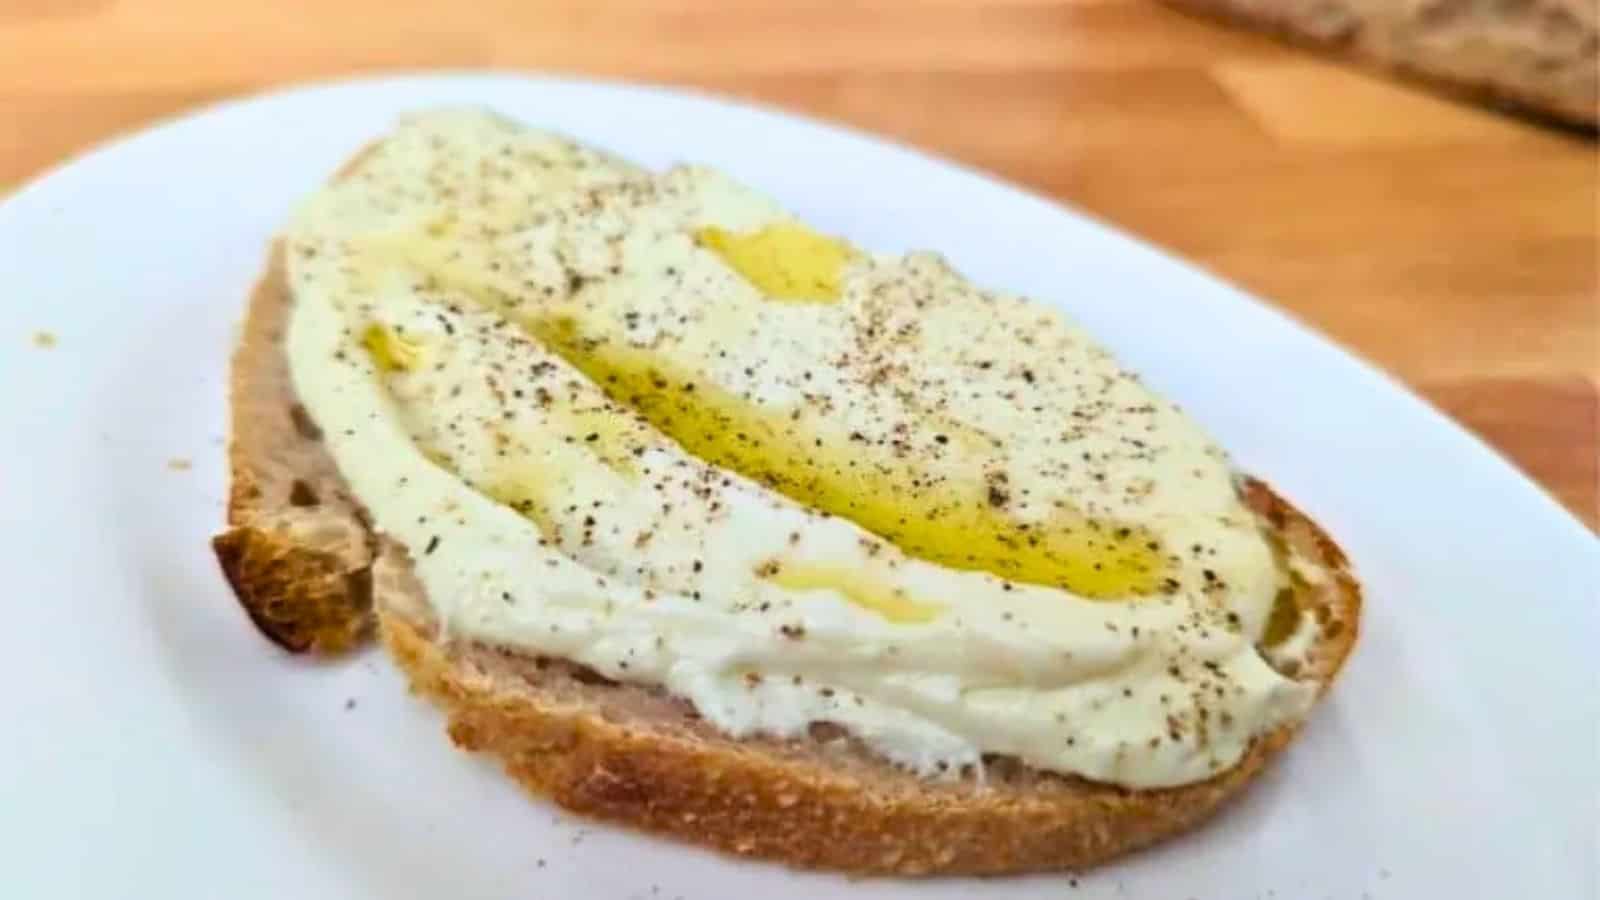 Image shows a white plate with whipped ricotta toast drizzled with olive oil on it.